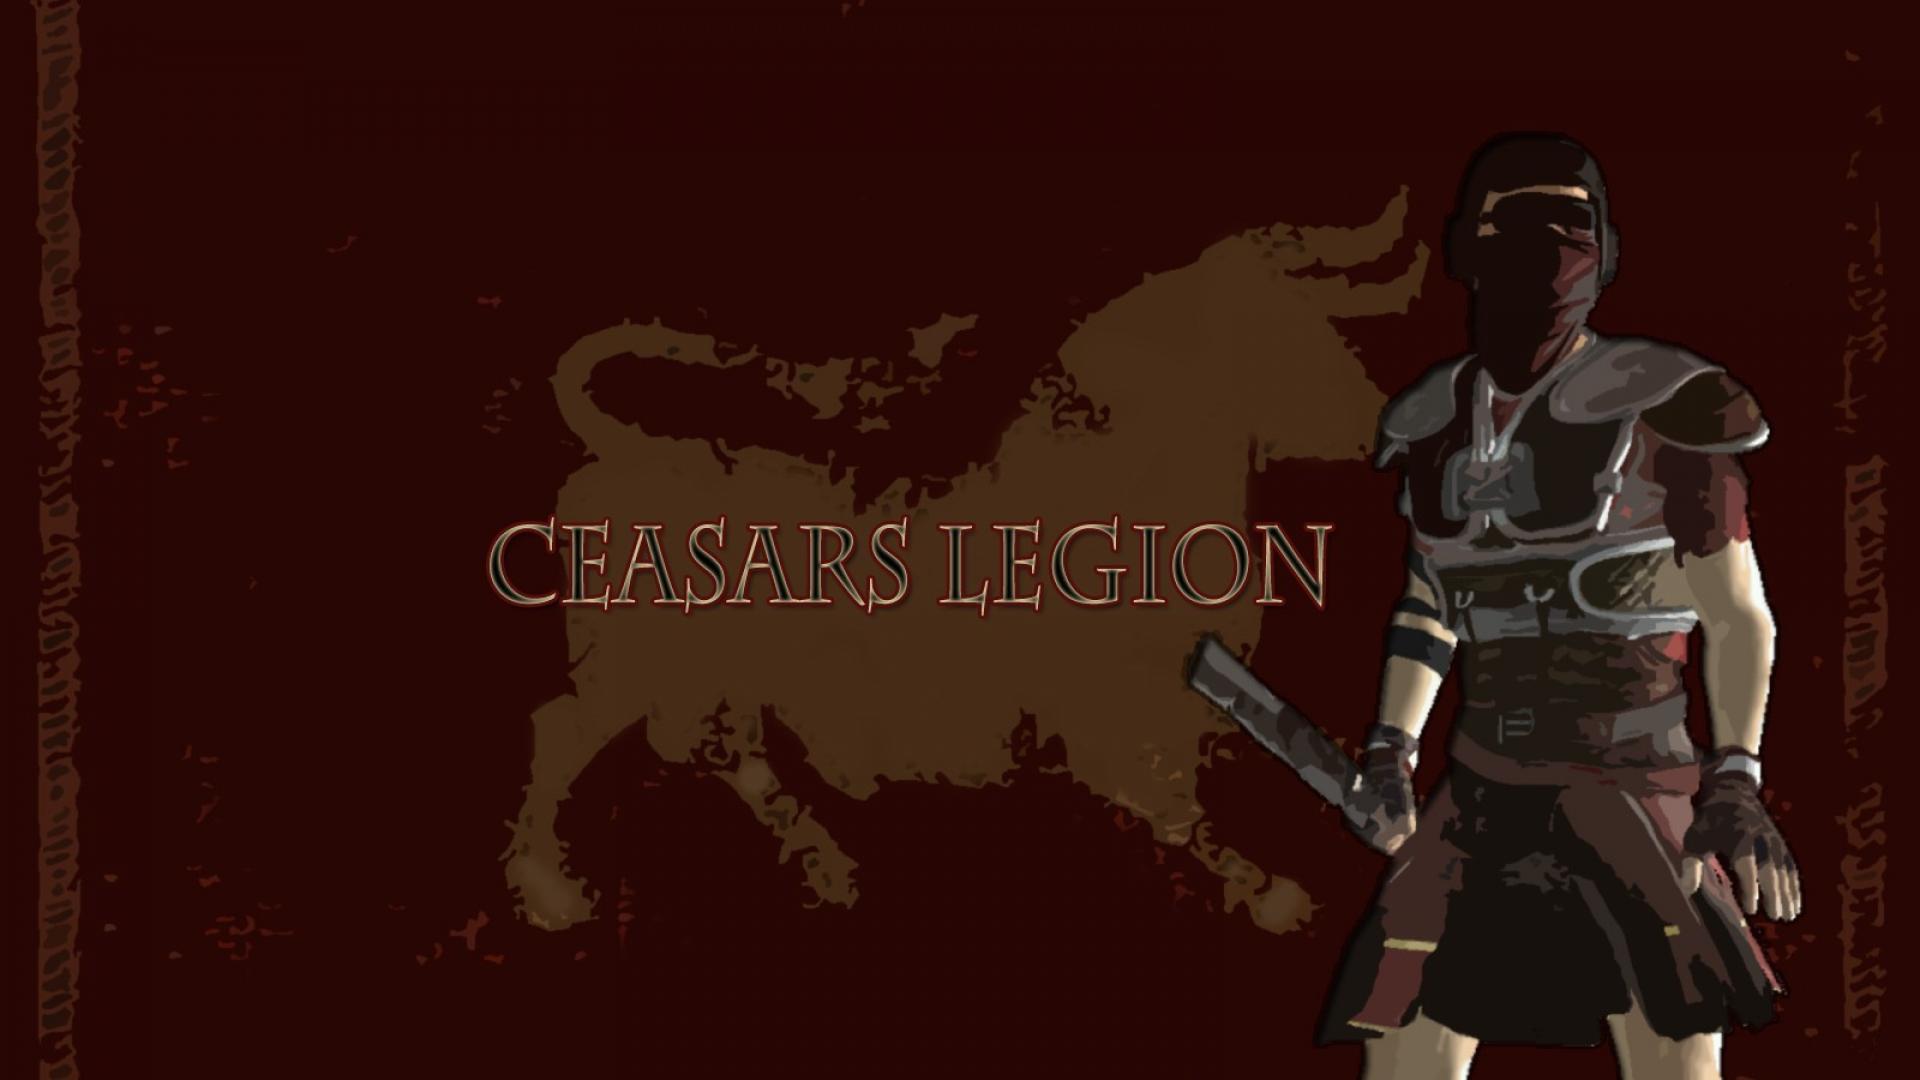 Legion Fallout New Vegas Fallout Game Ceasars Wallpaper